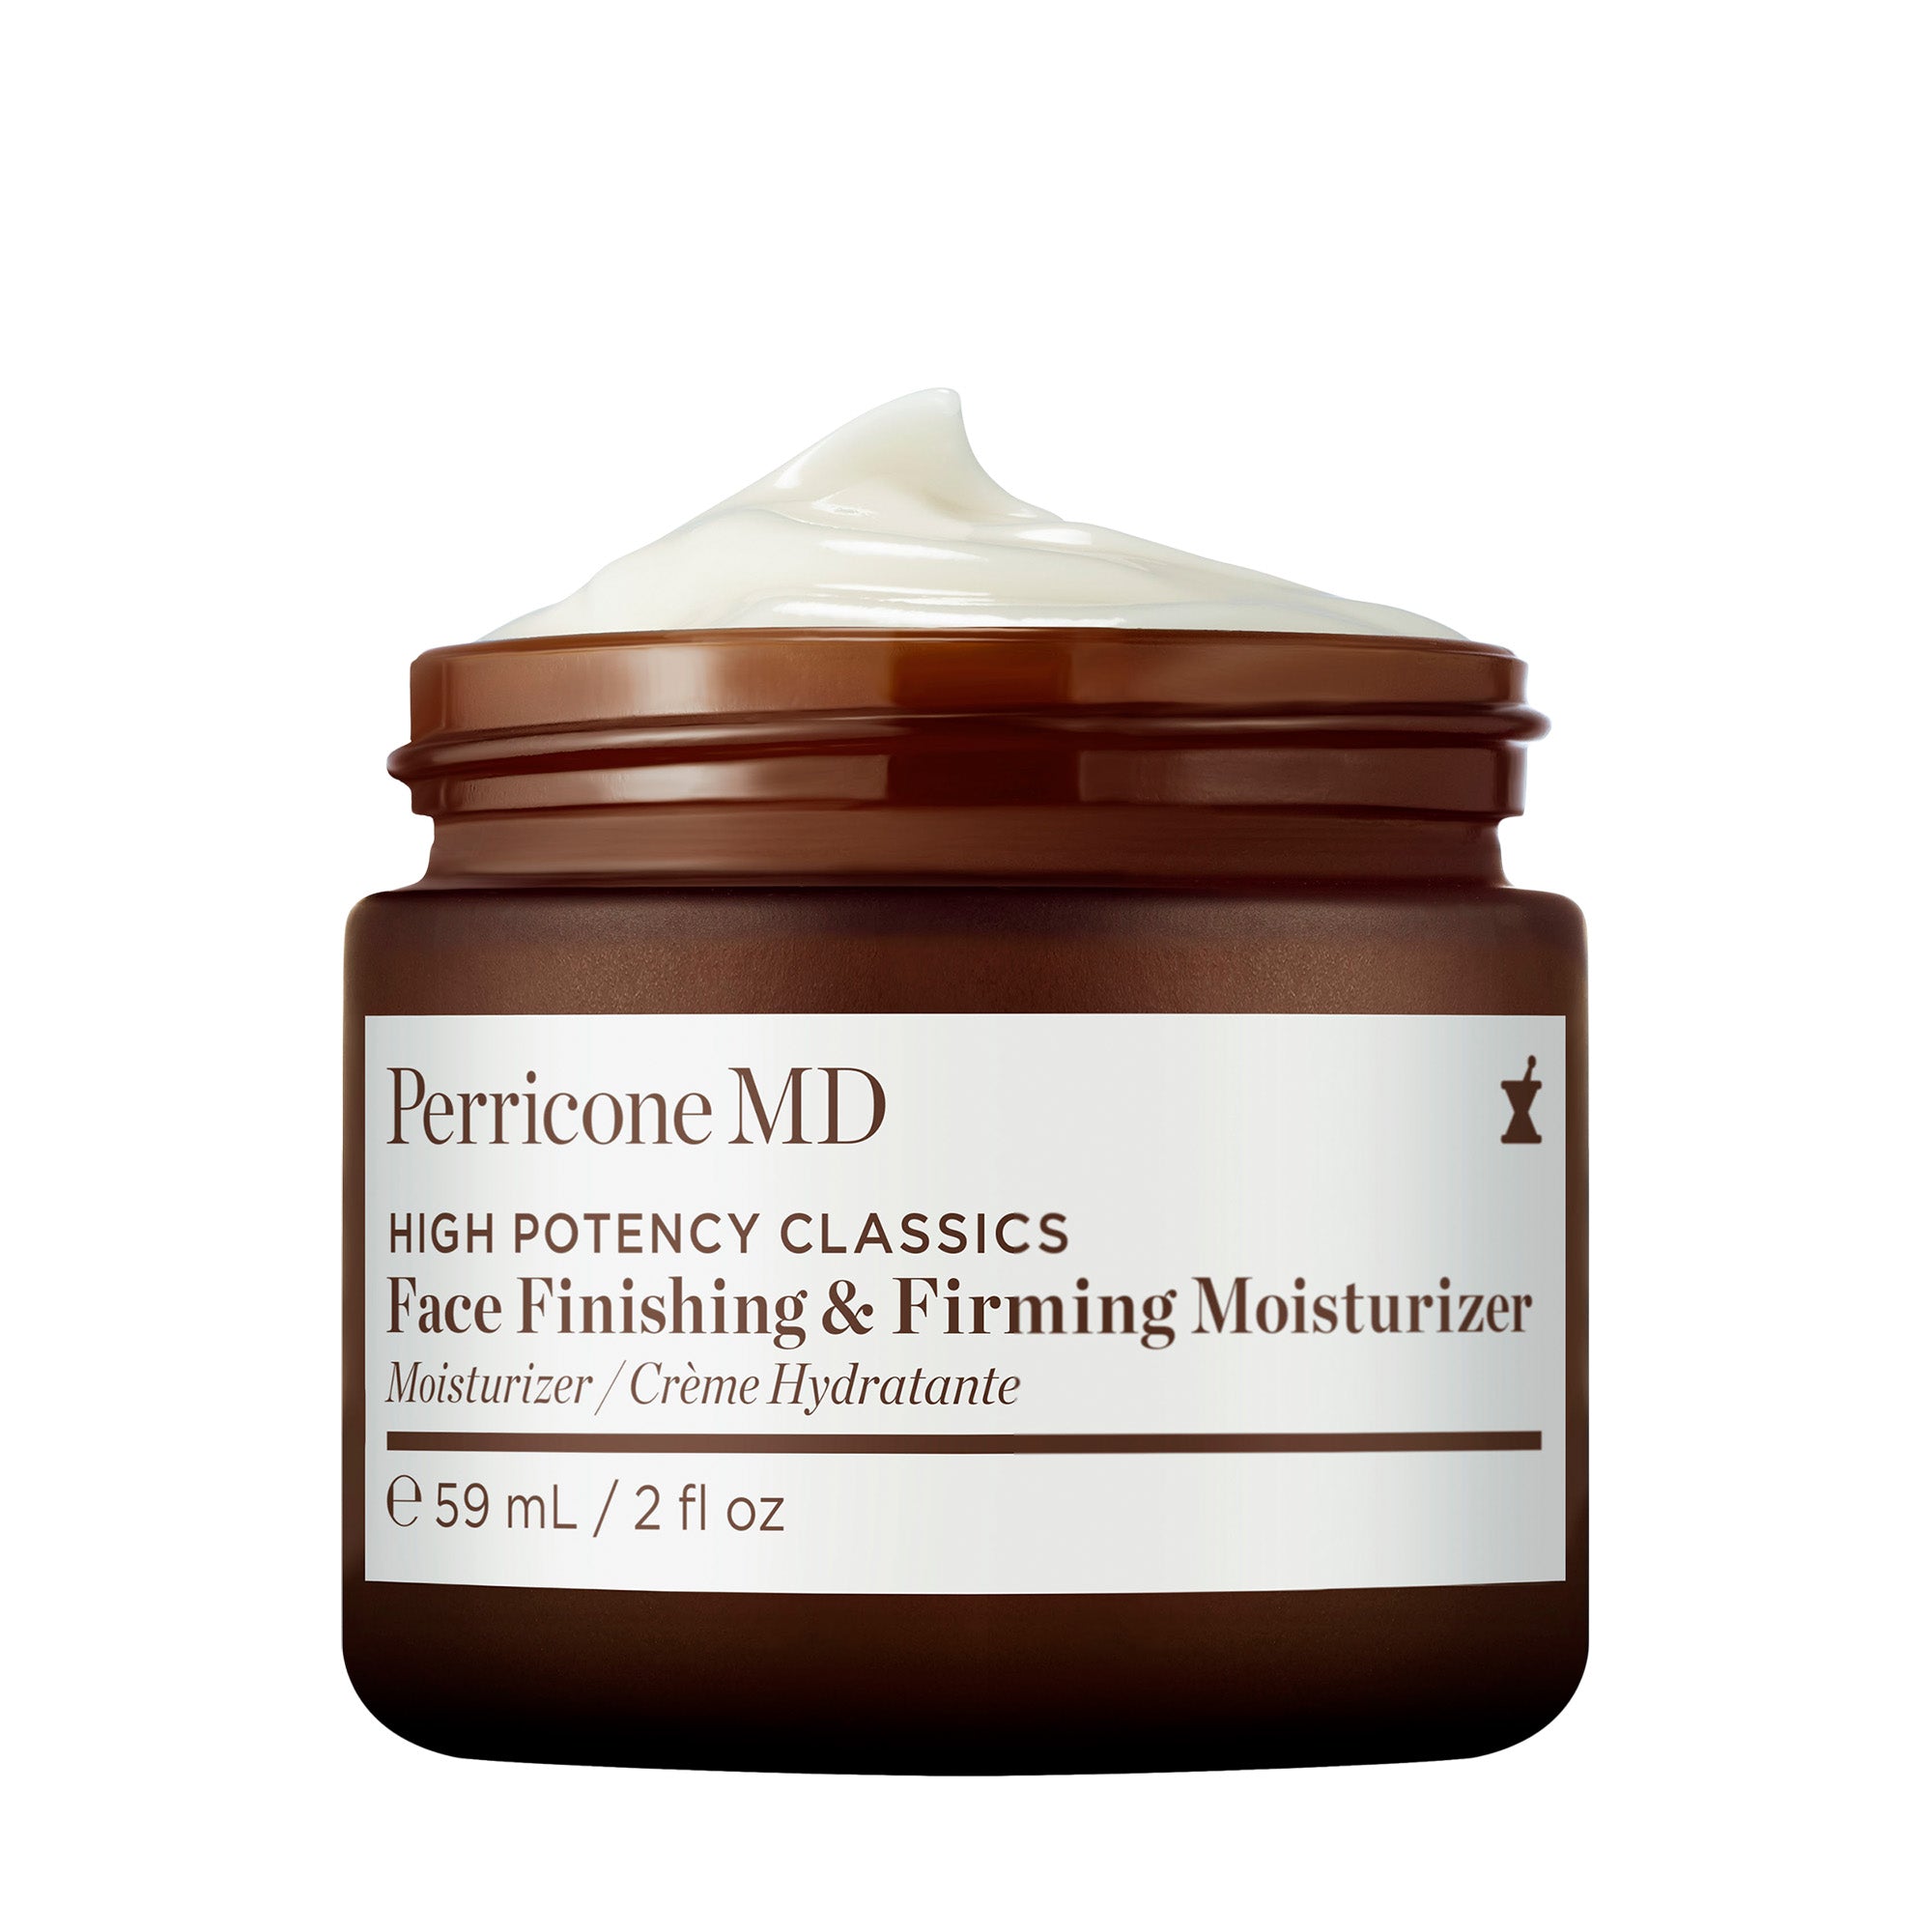 Perricone MD High Potency Classics Face Finishing & Firming Moisturizer / 2OZ